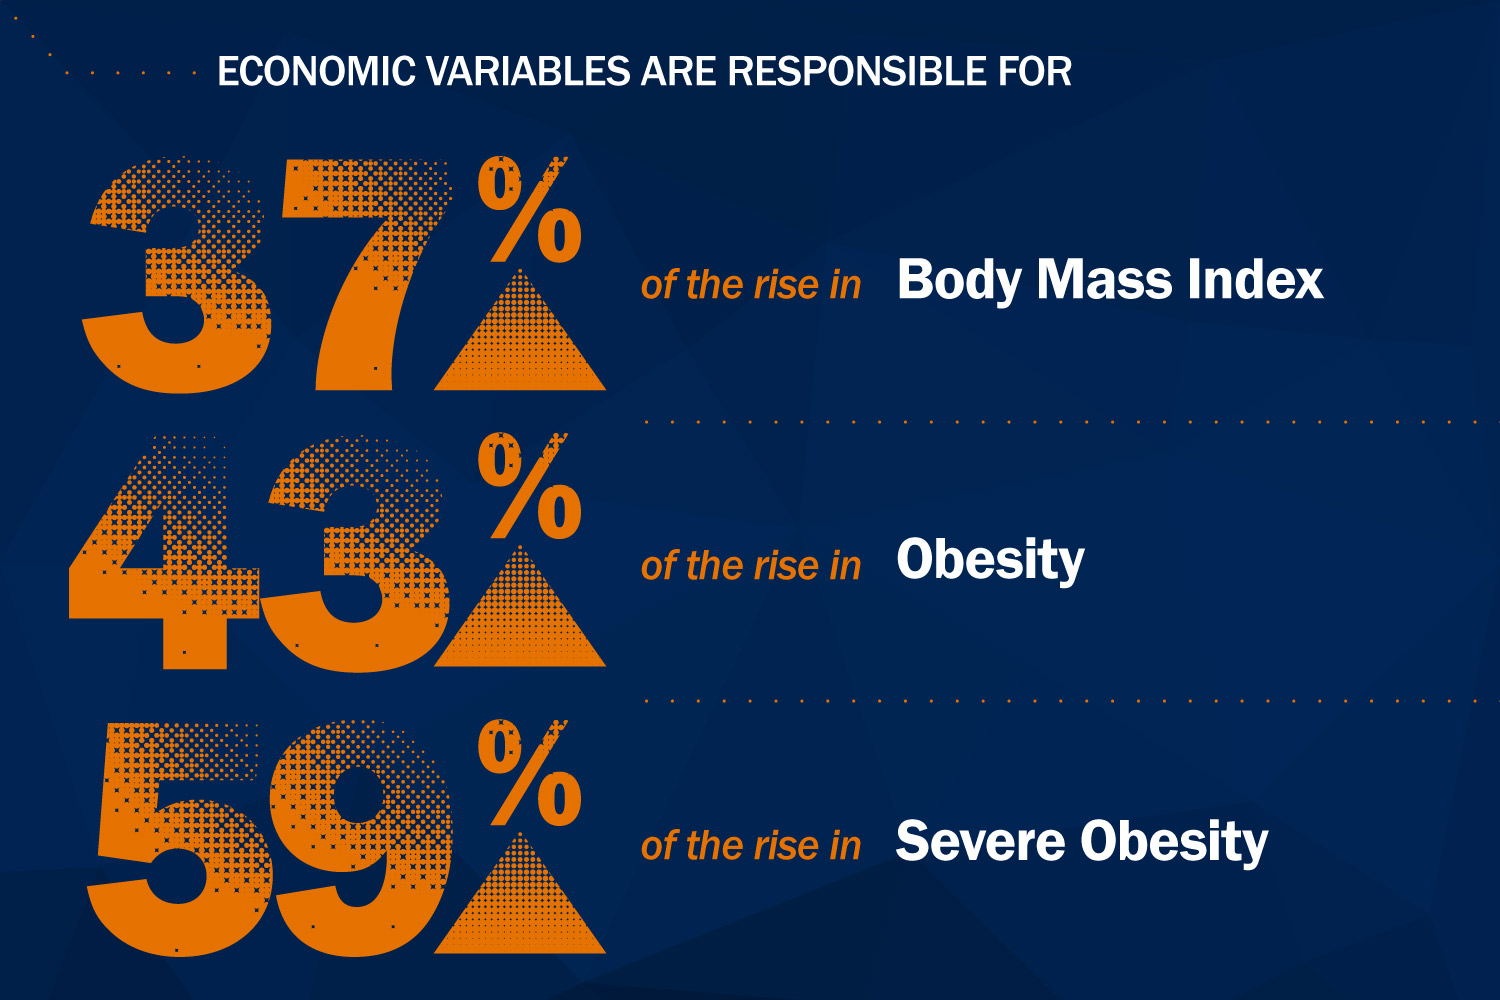 Text reads: Economic Variables are responsible for 37% of the rise in Body Mass Index. 43% of the rise in Obesity 59% of the rise in Severe Obesity